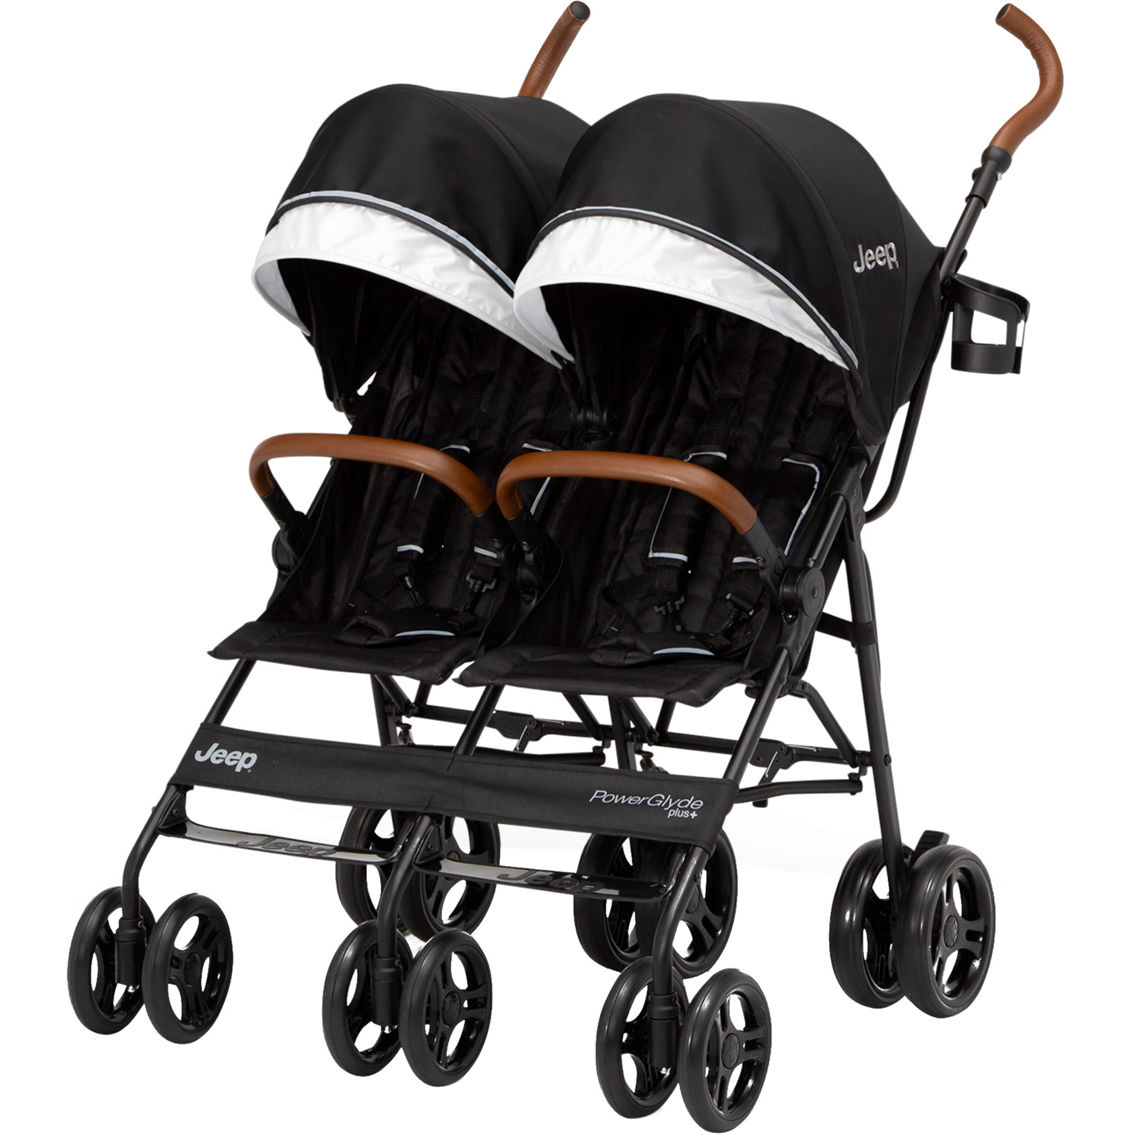 Jeep PowerGlyde Plus Side x Side Double Stroller - Image 4 of 9